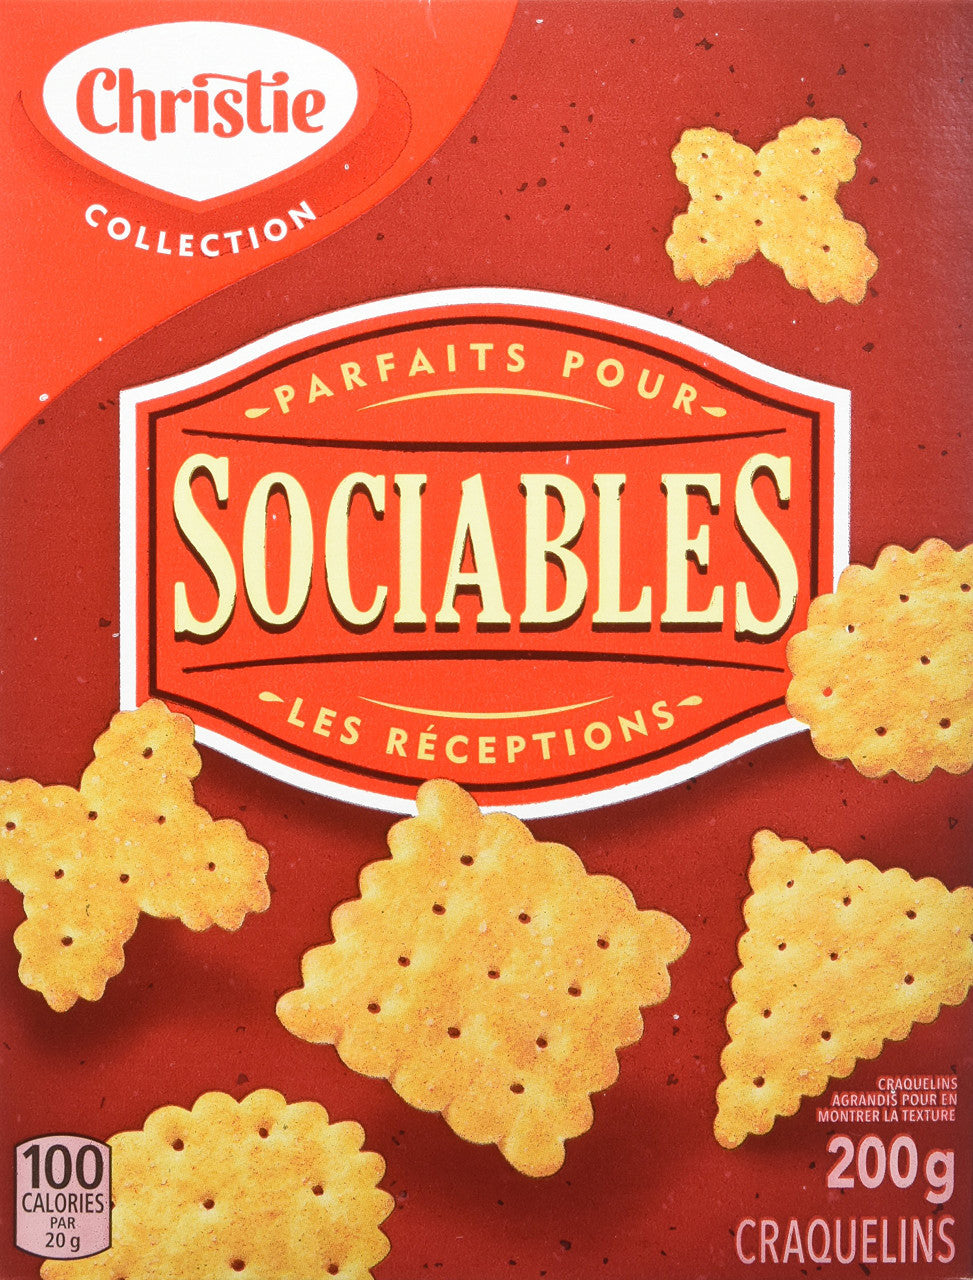 Christie SOCIABLES Crackers, 200g/7.1oz, (Imported from Canada)